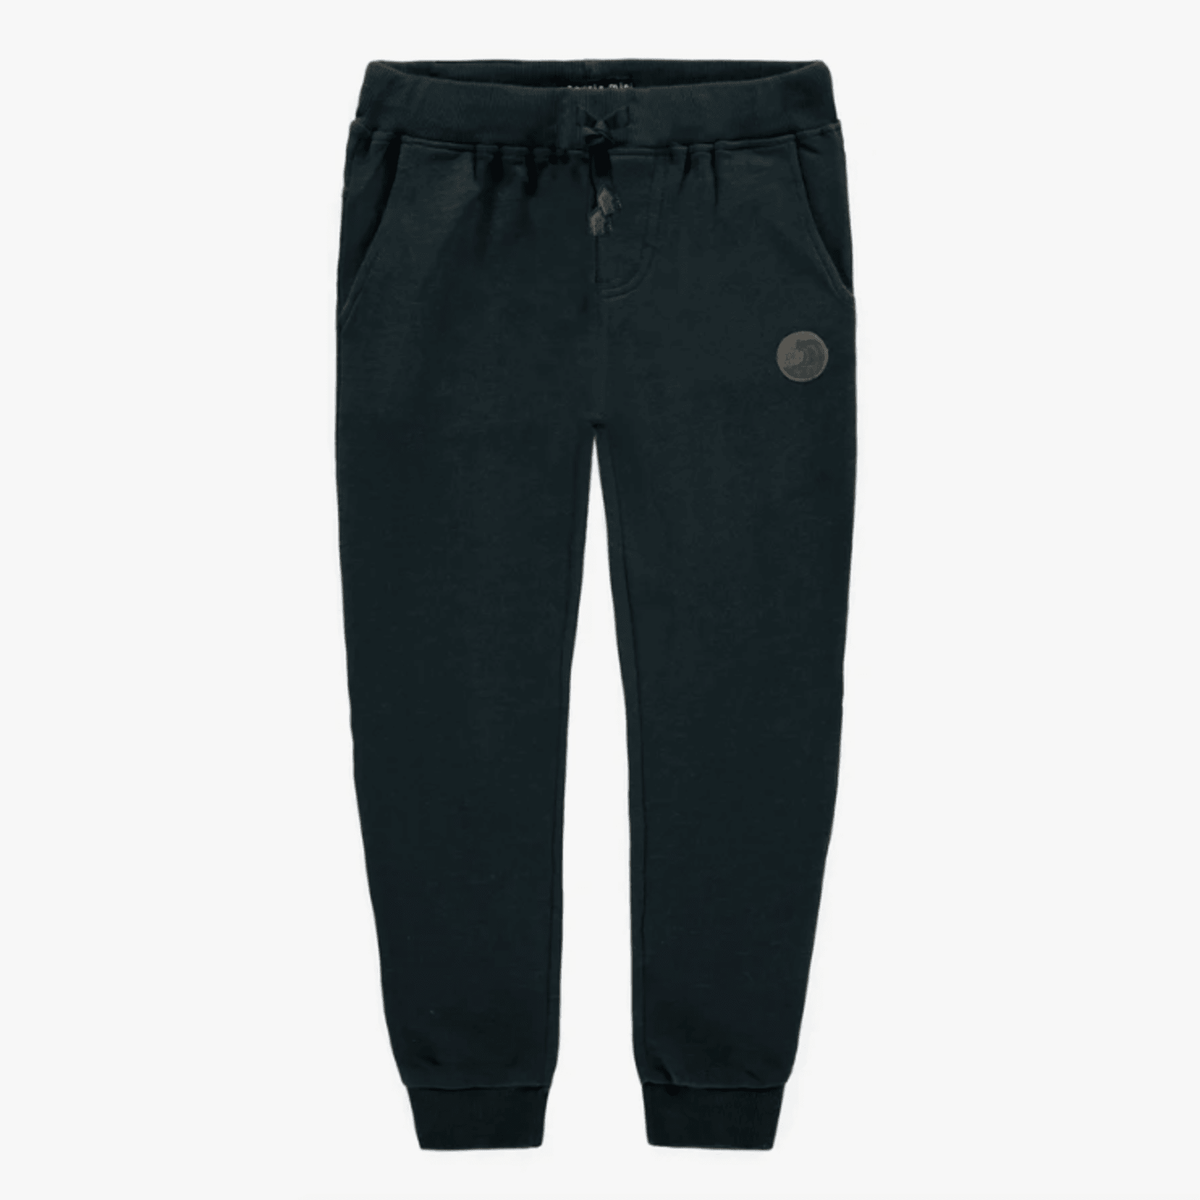 Navy Slim Fit Pants in French Terry